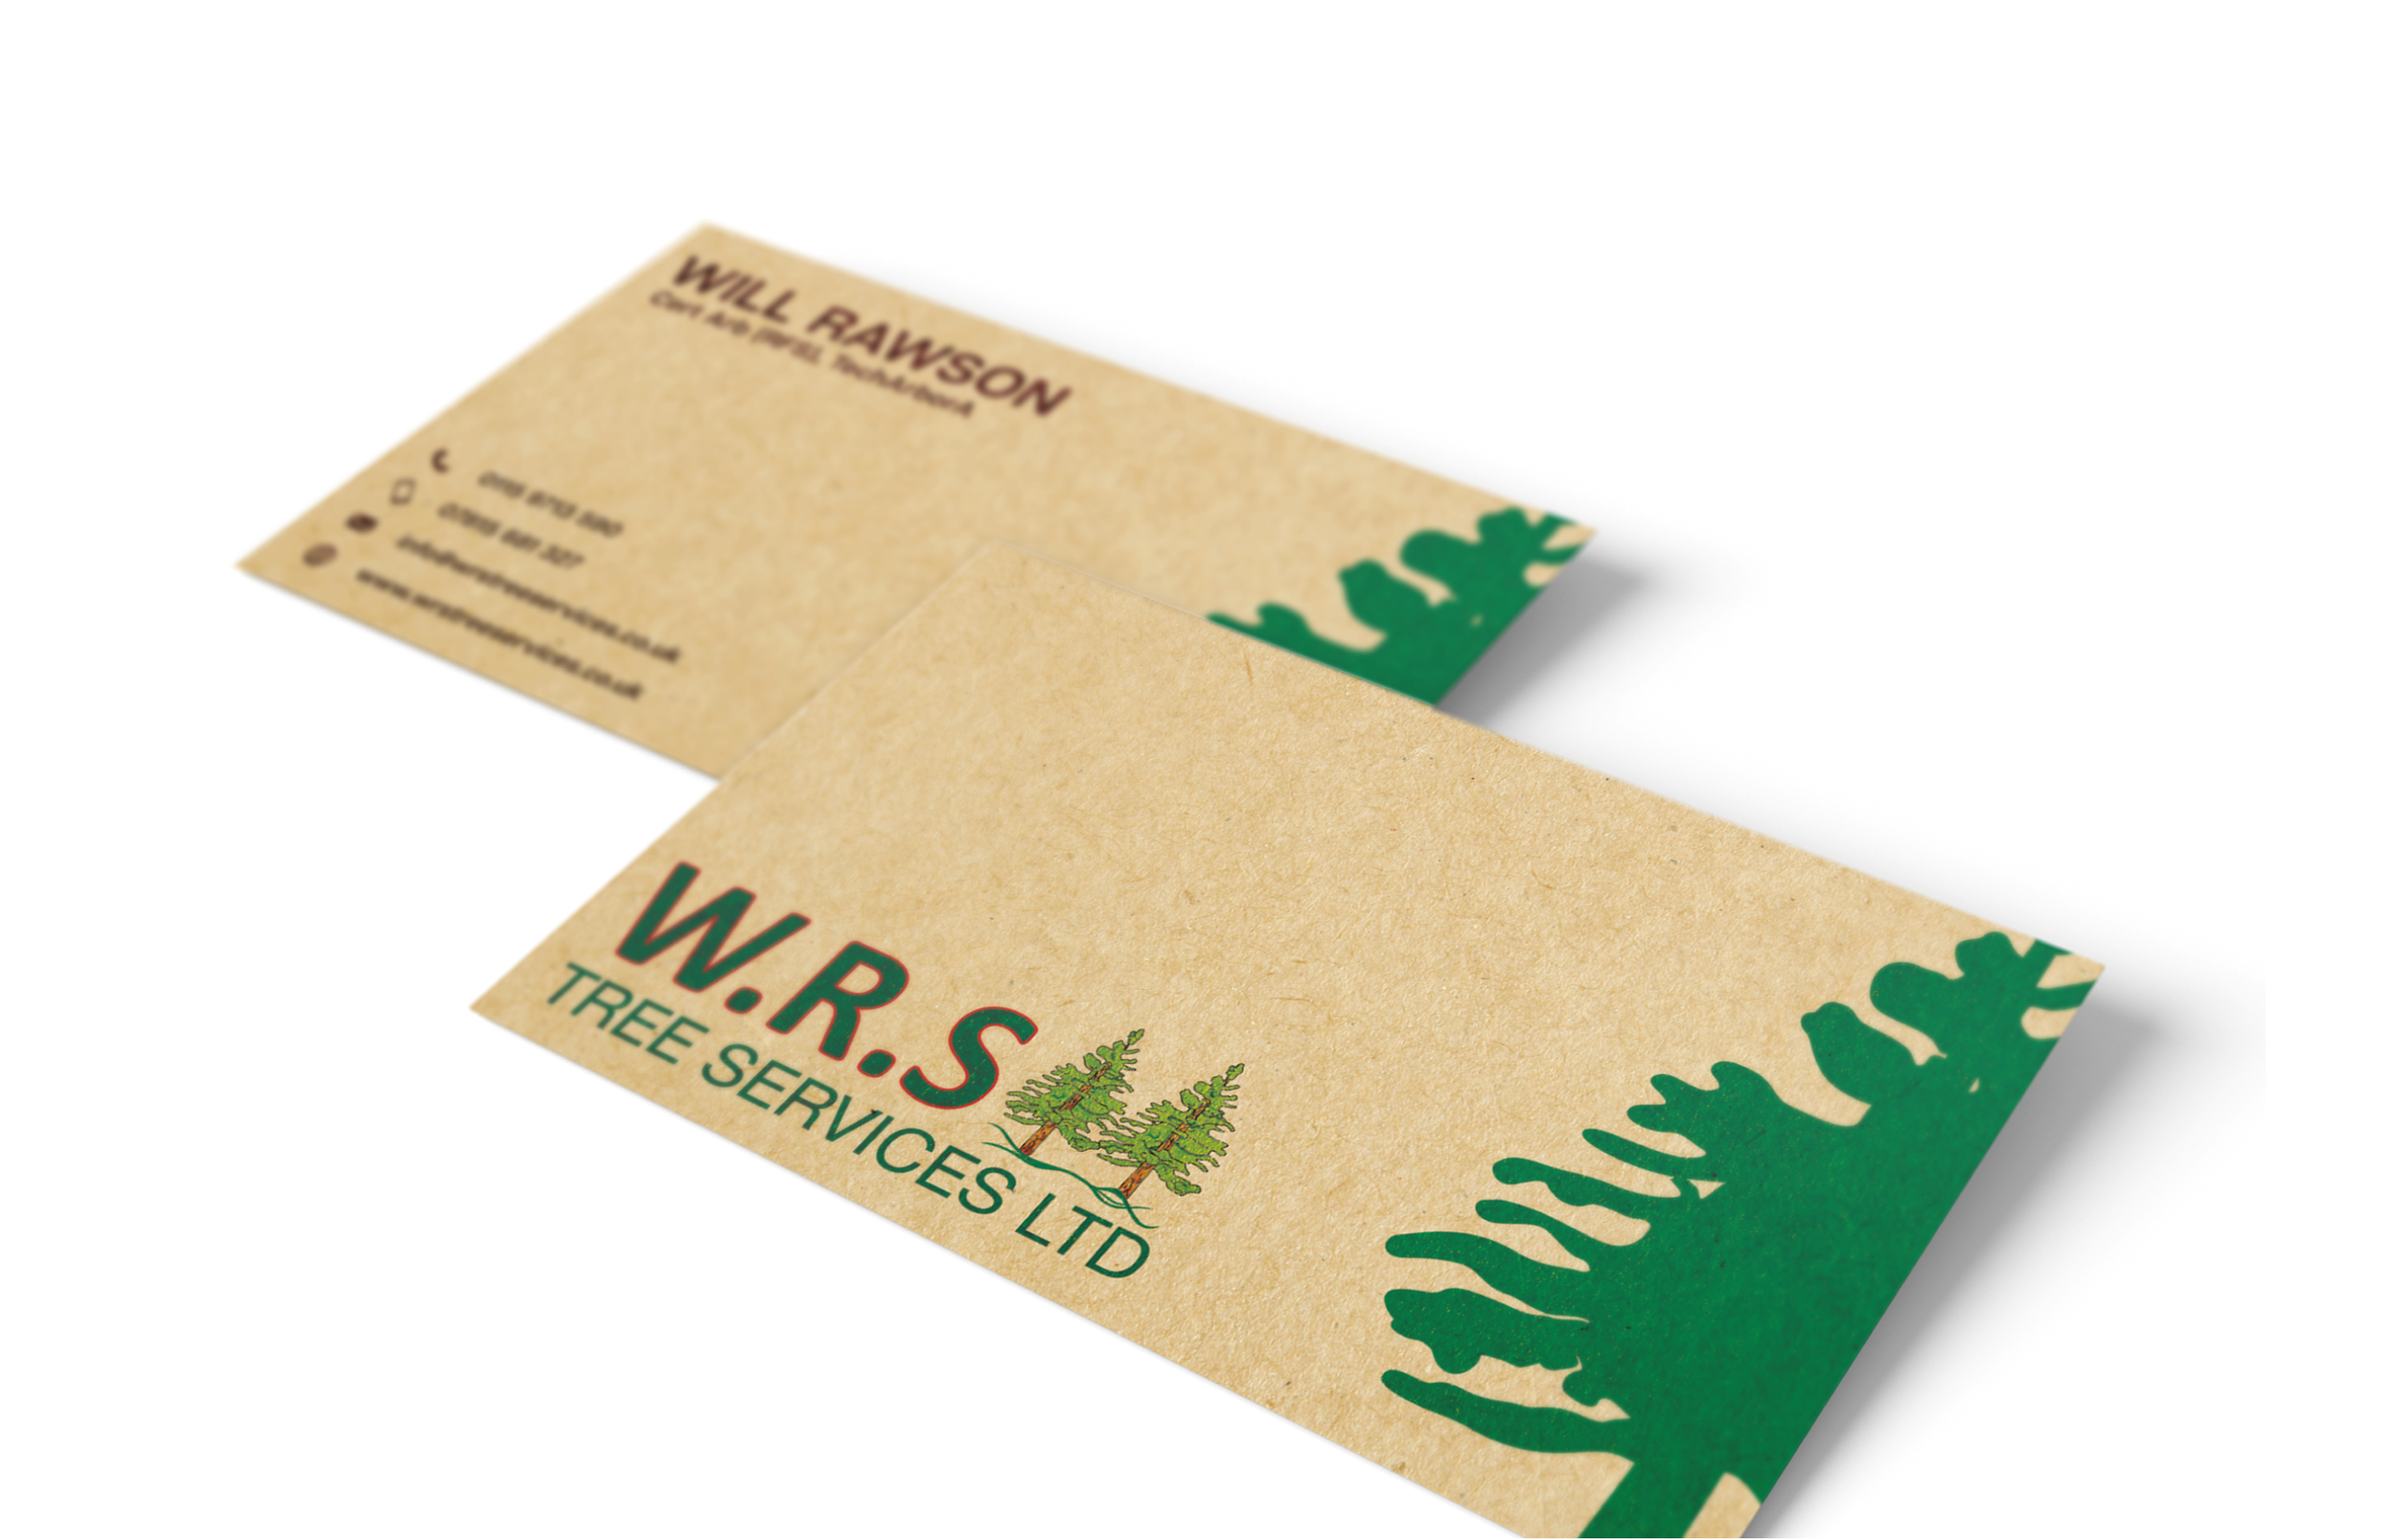 W.R.S Tree Services Business Card Design (Copy)